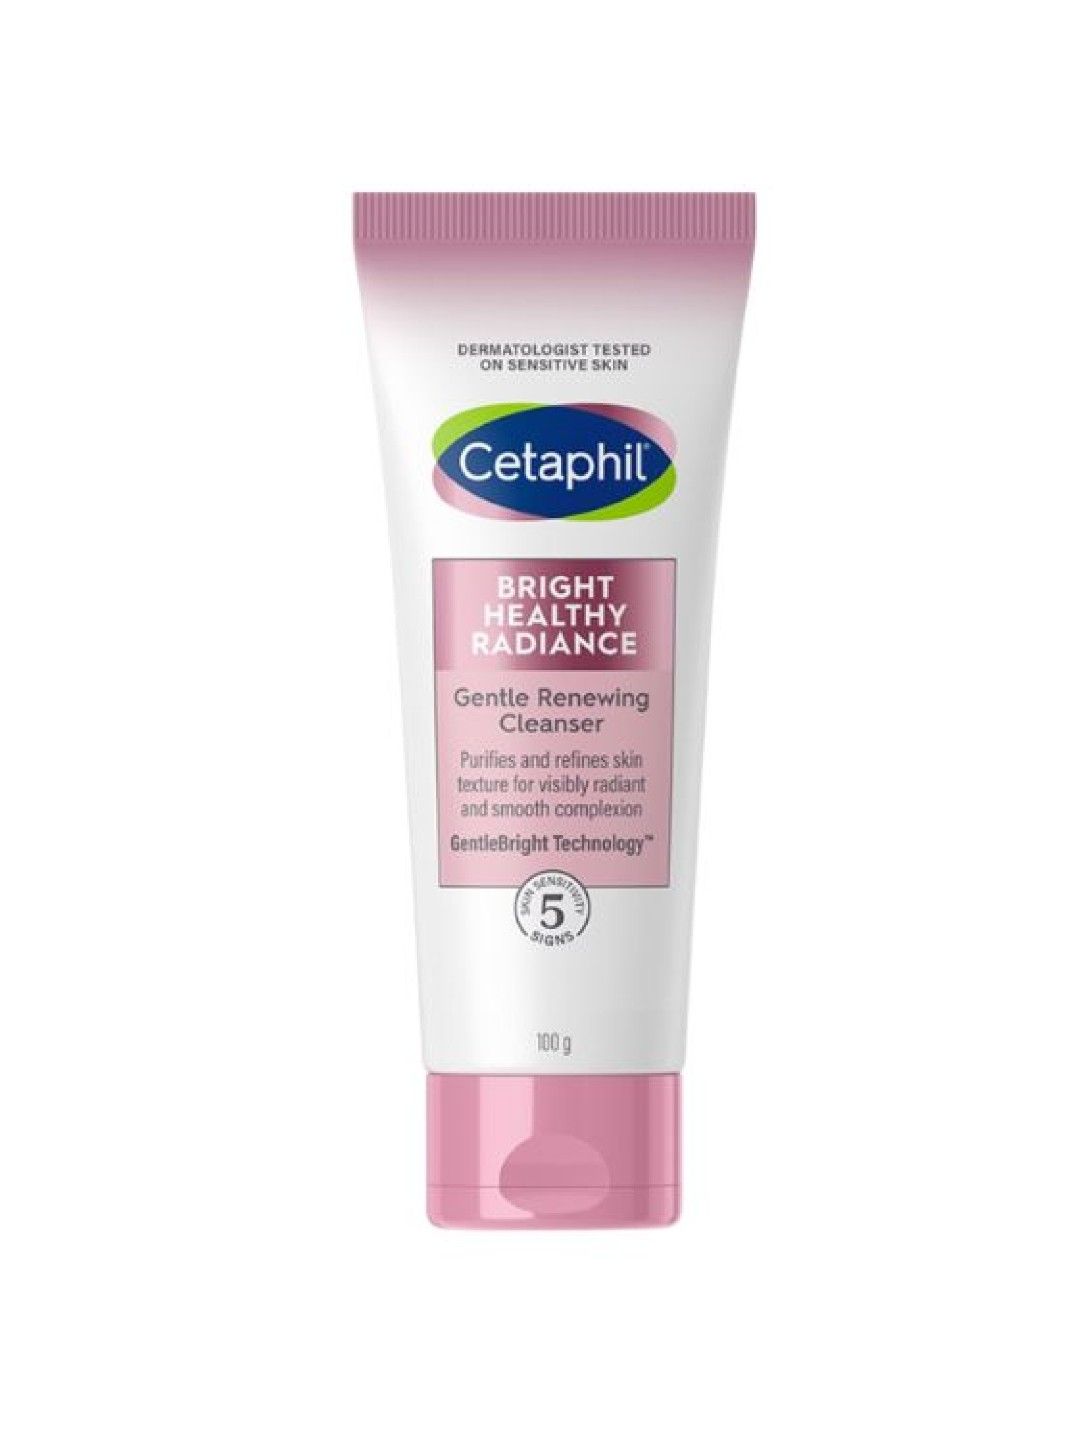 Cetaphil Bright Healthy Radiance Gentle Renewing Cleanser (100g) (No Color- Image 1)